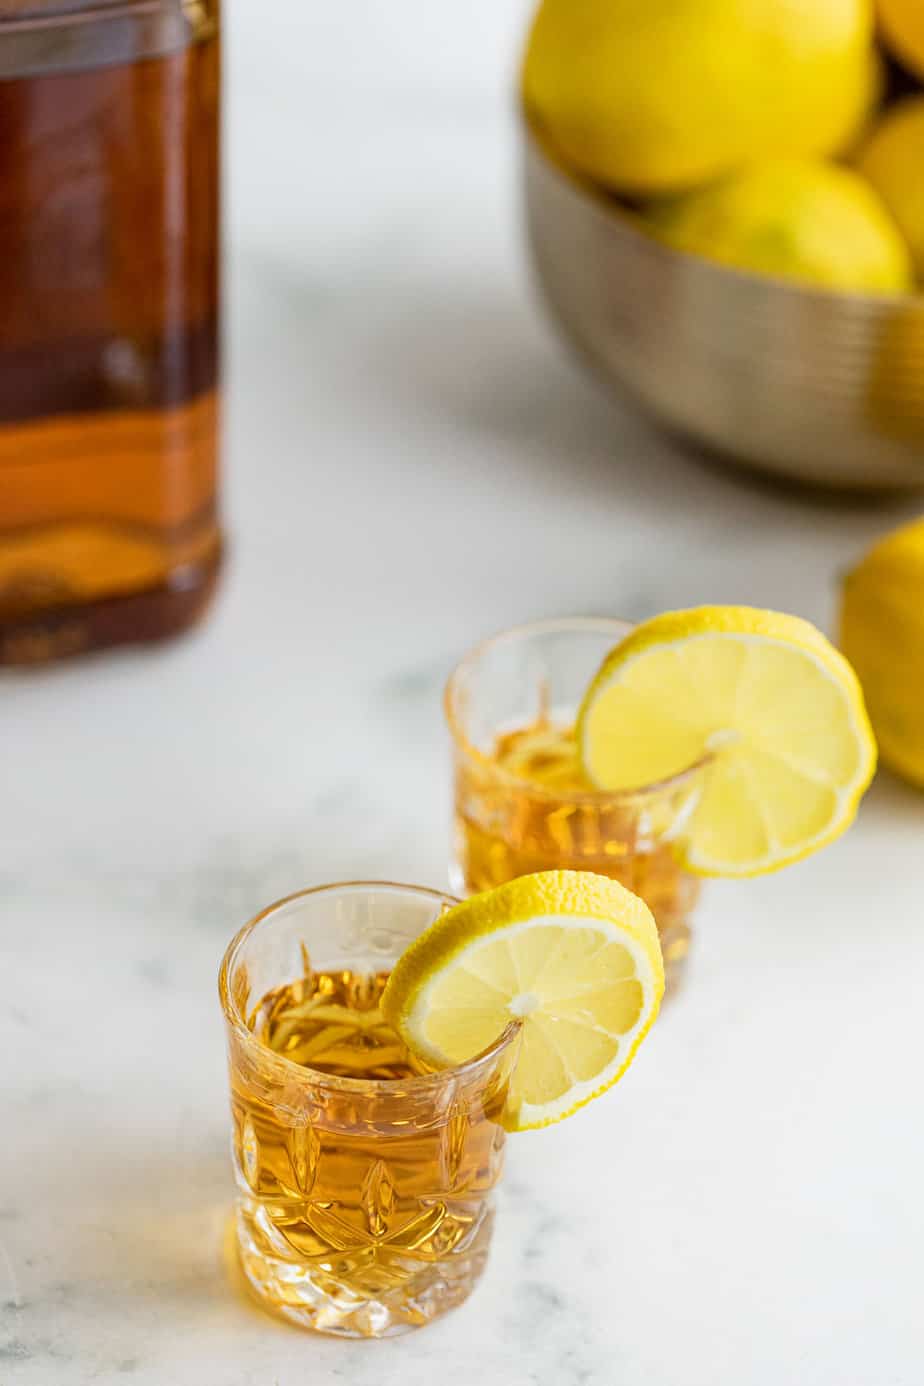 Whiskey in two shot glasses with lemons